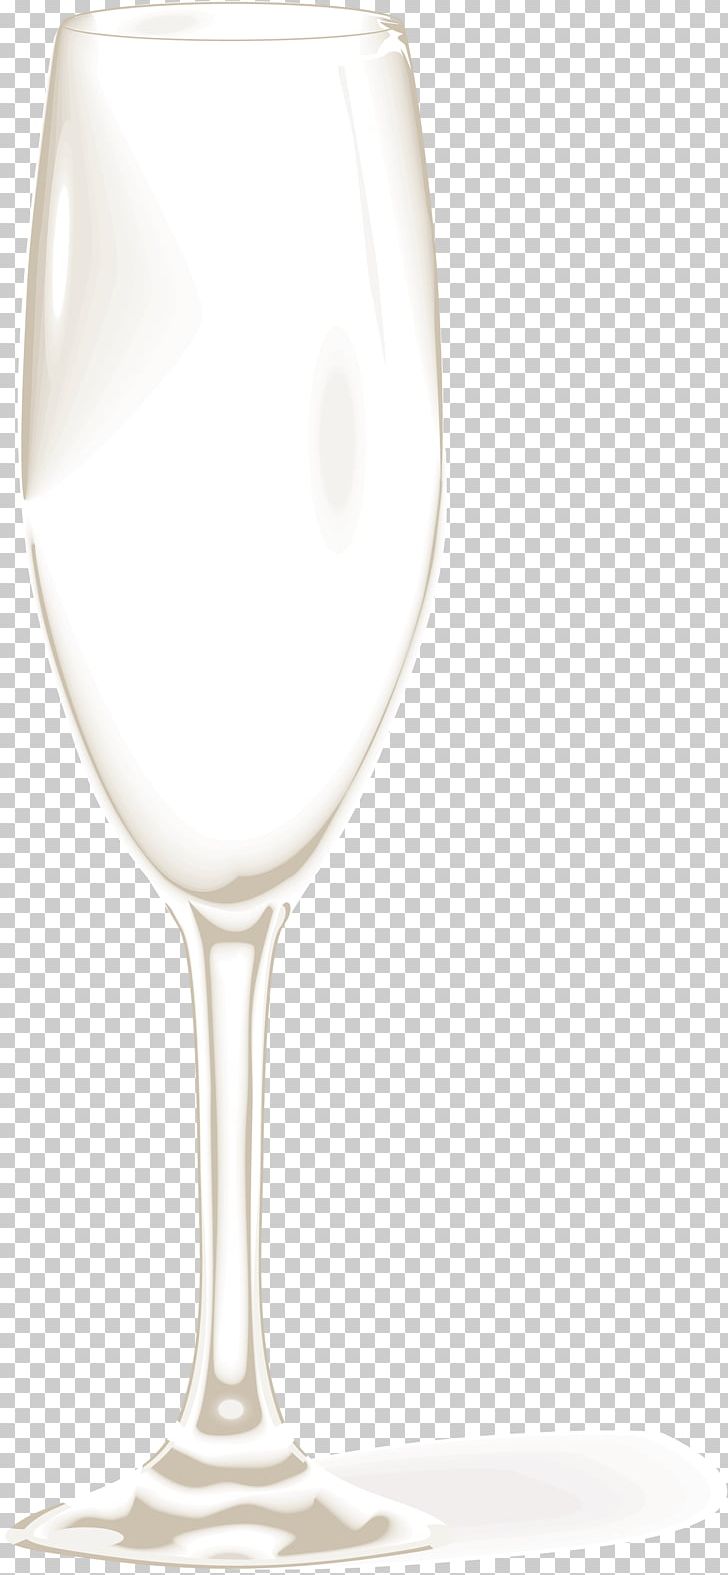 Champagne Glass Drink White Wine Wine Glass PNG, Clipart, Alcoholic Drink, Beer Glass, Bottle, Champagne, Champagne Glass Free PNG Download